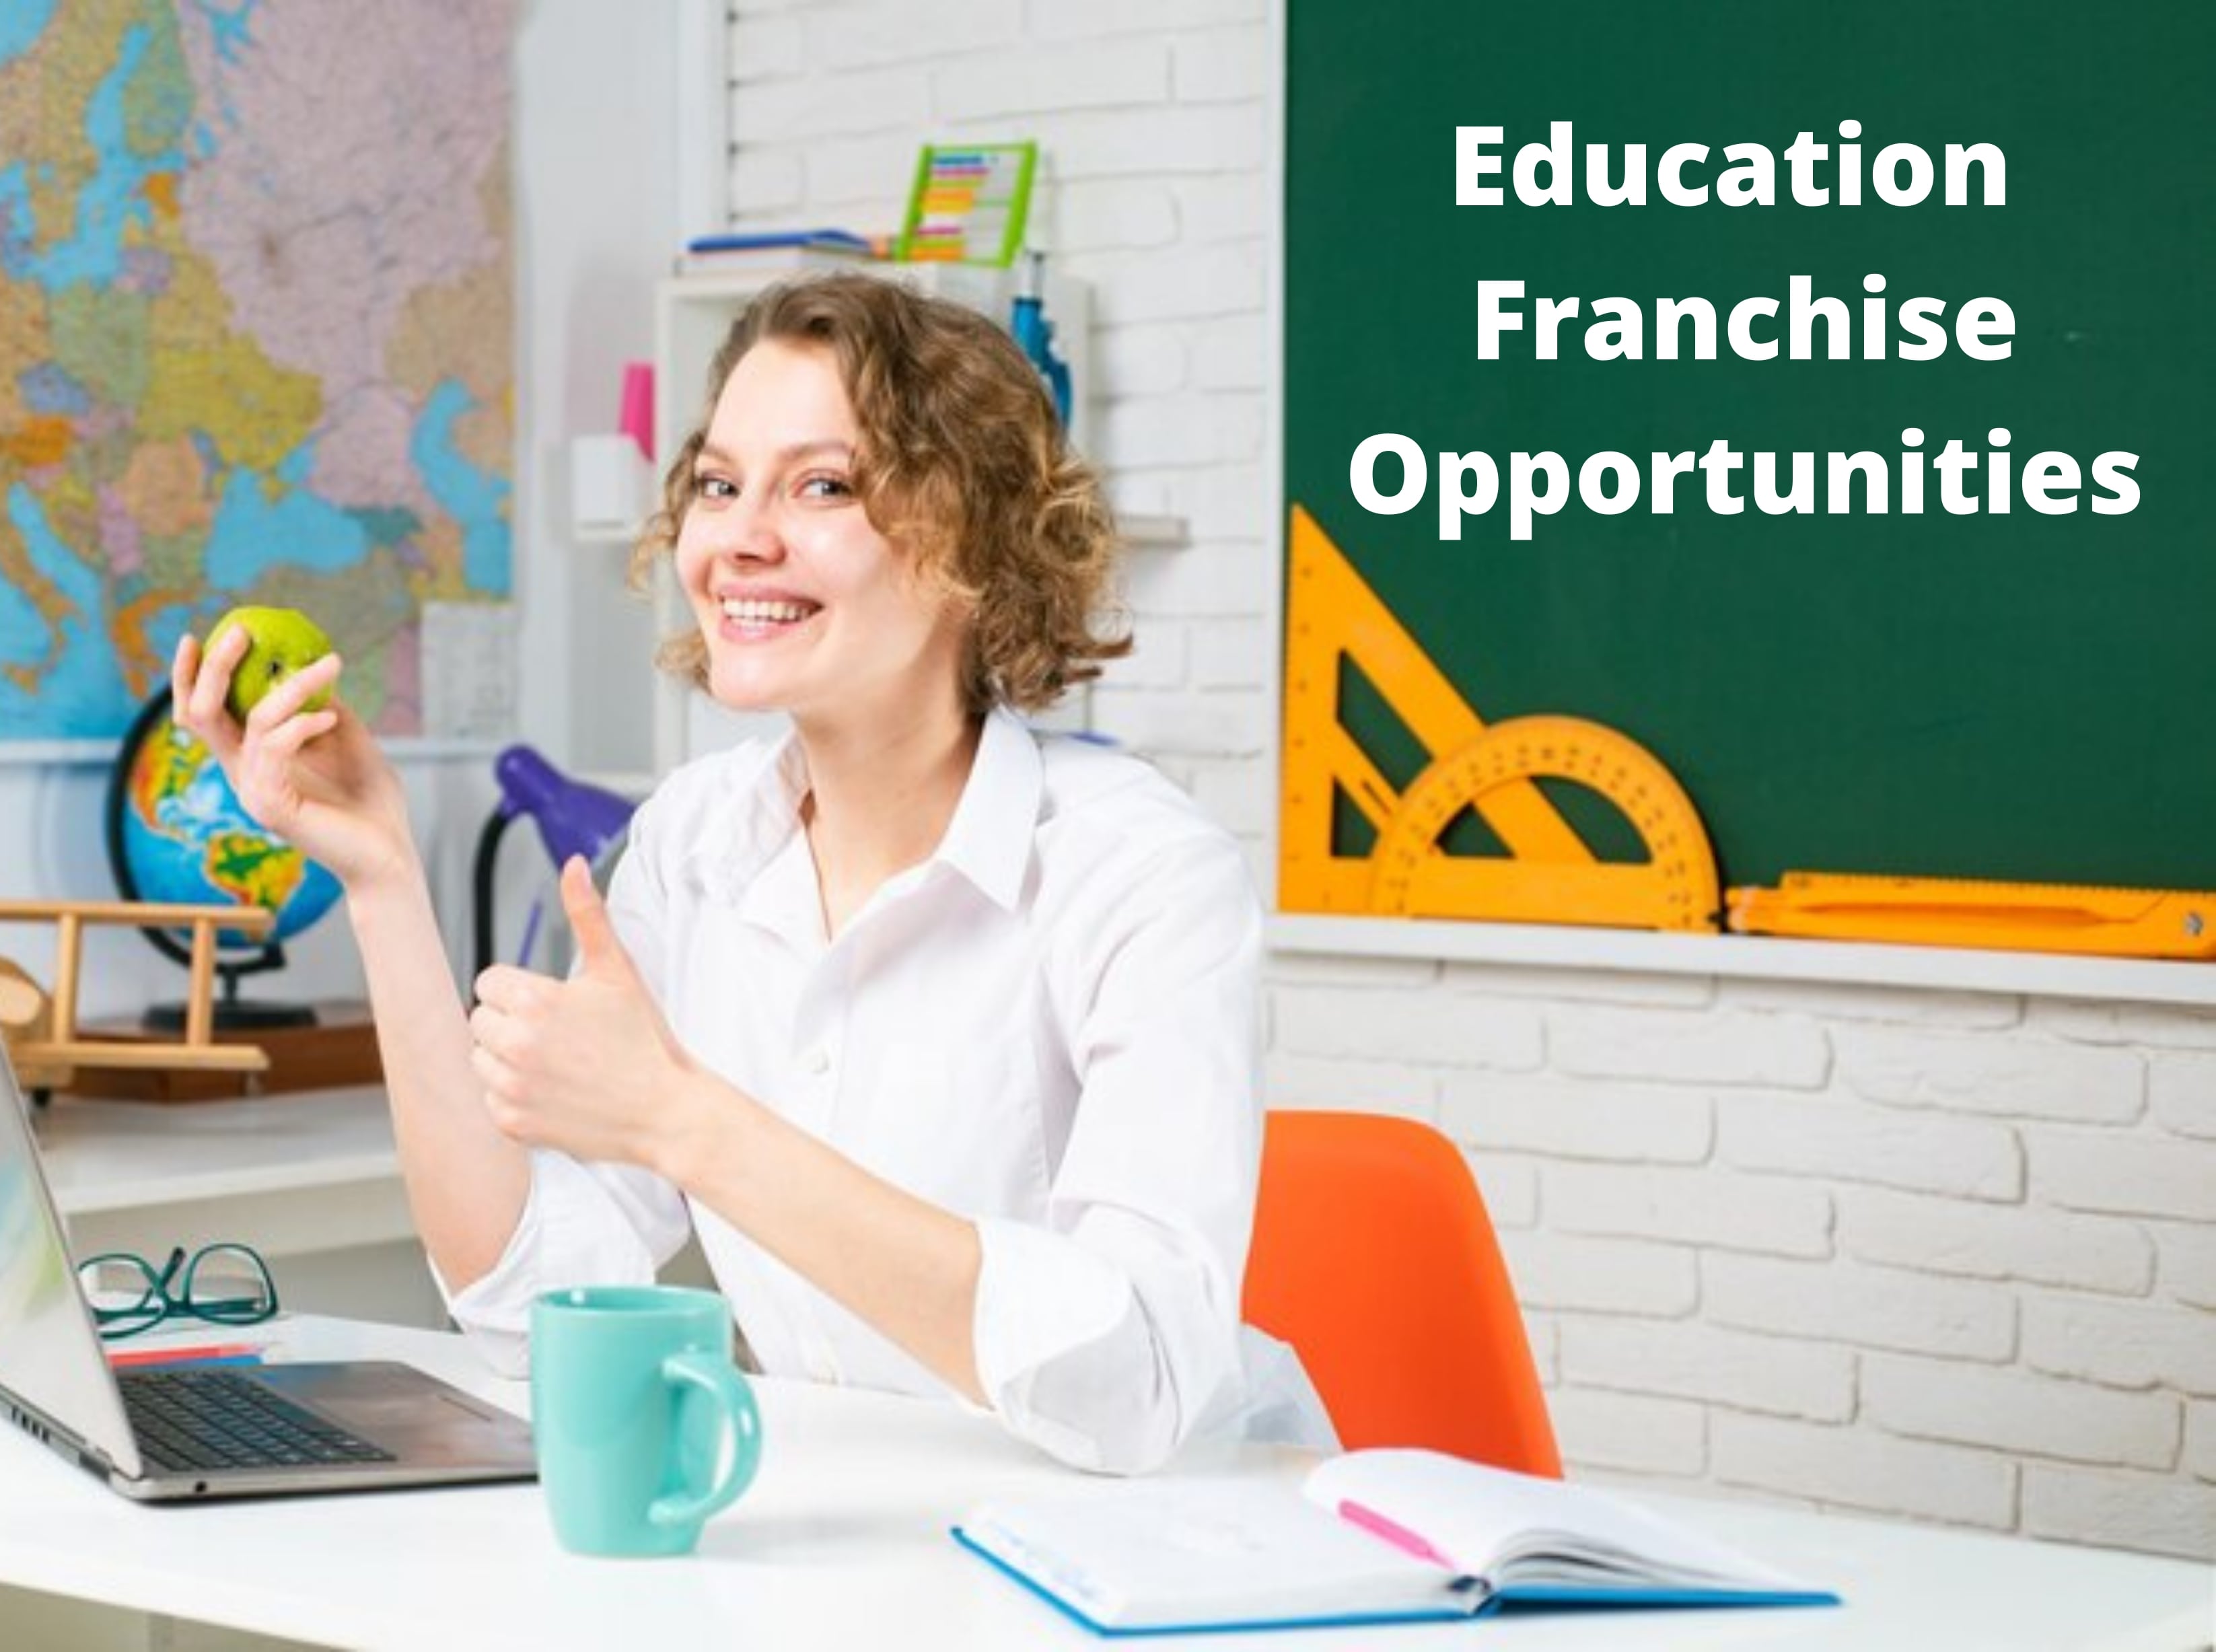 education franchise opportunities | Education Franchise Opportunities in India | franchise opportunities in education